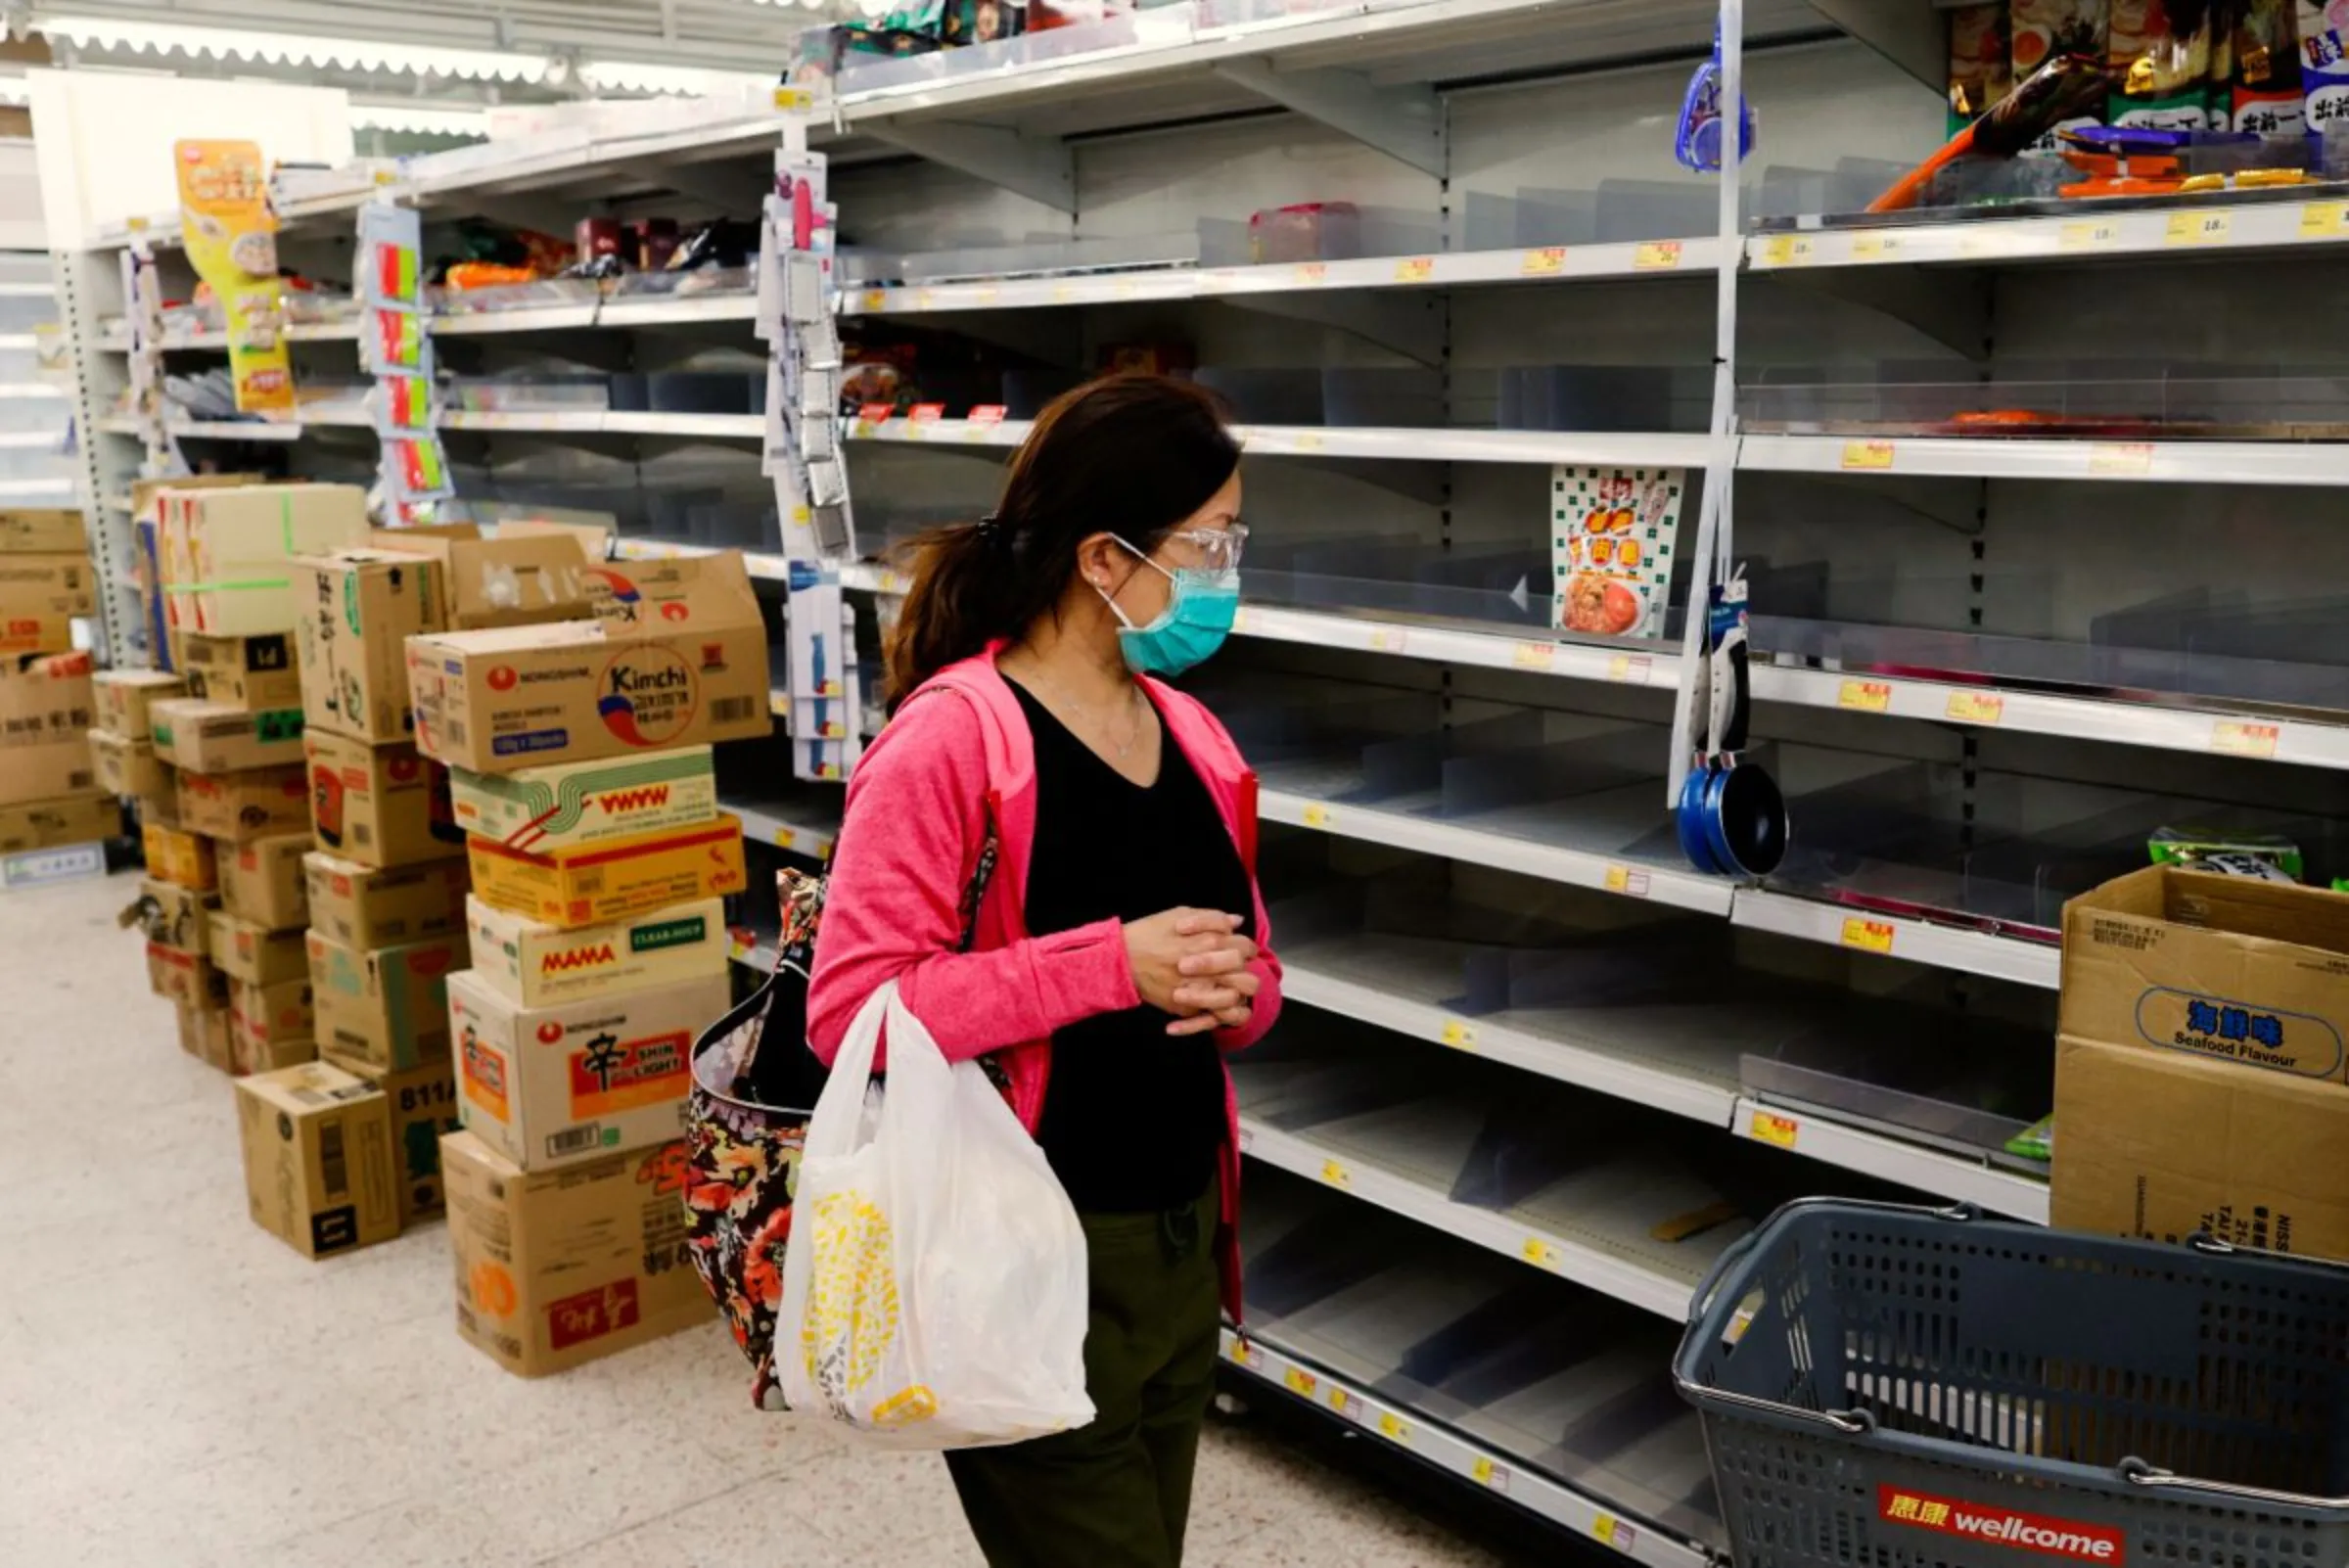 A customer wearing a face mask shops in front of partially empty shelves at a supermarket, ahead of mass coronavirus disease (COVID-19) testing, in Hong Kong, China March 4, 2022. REUTERS/Tyrone Siu